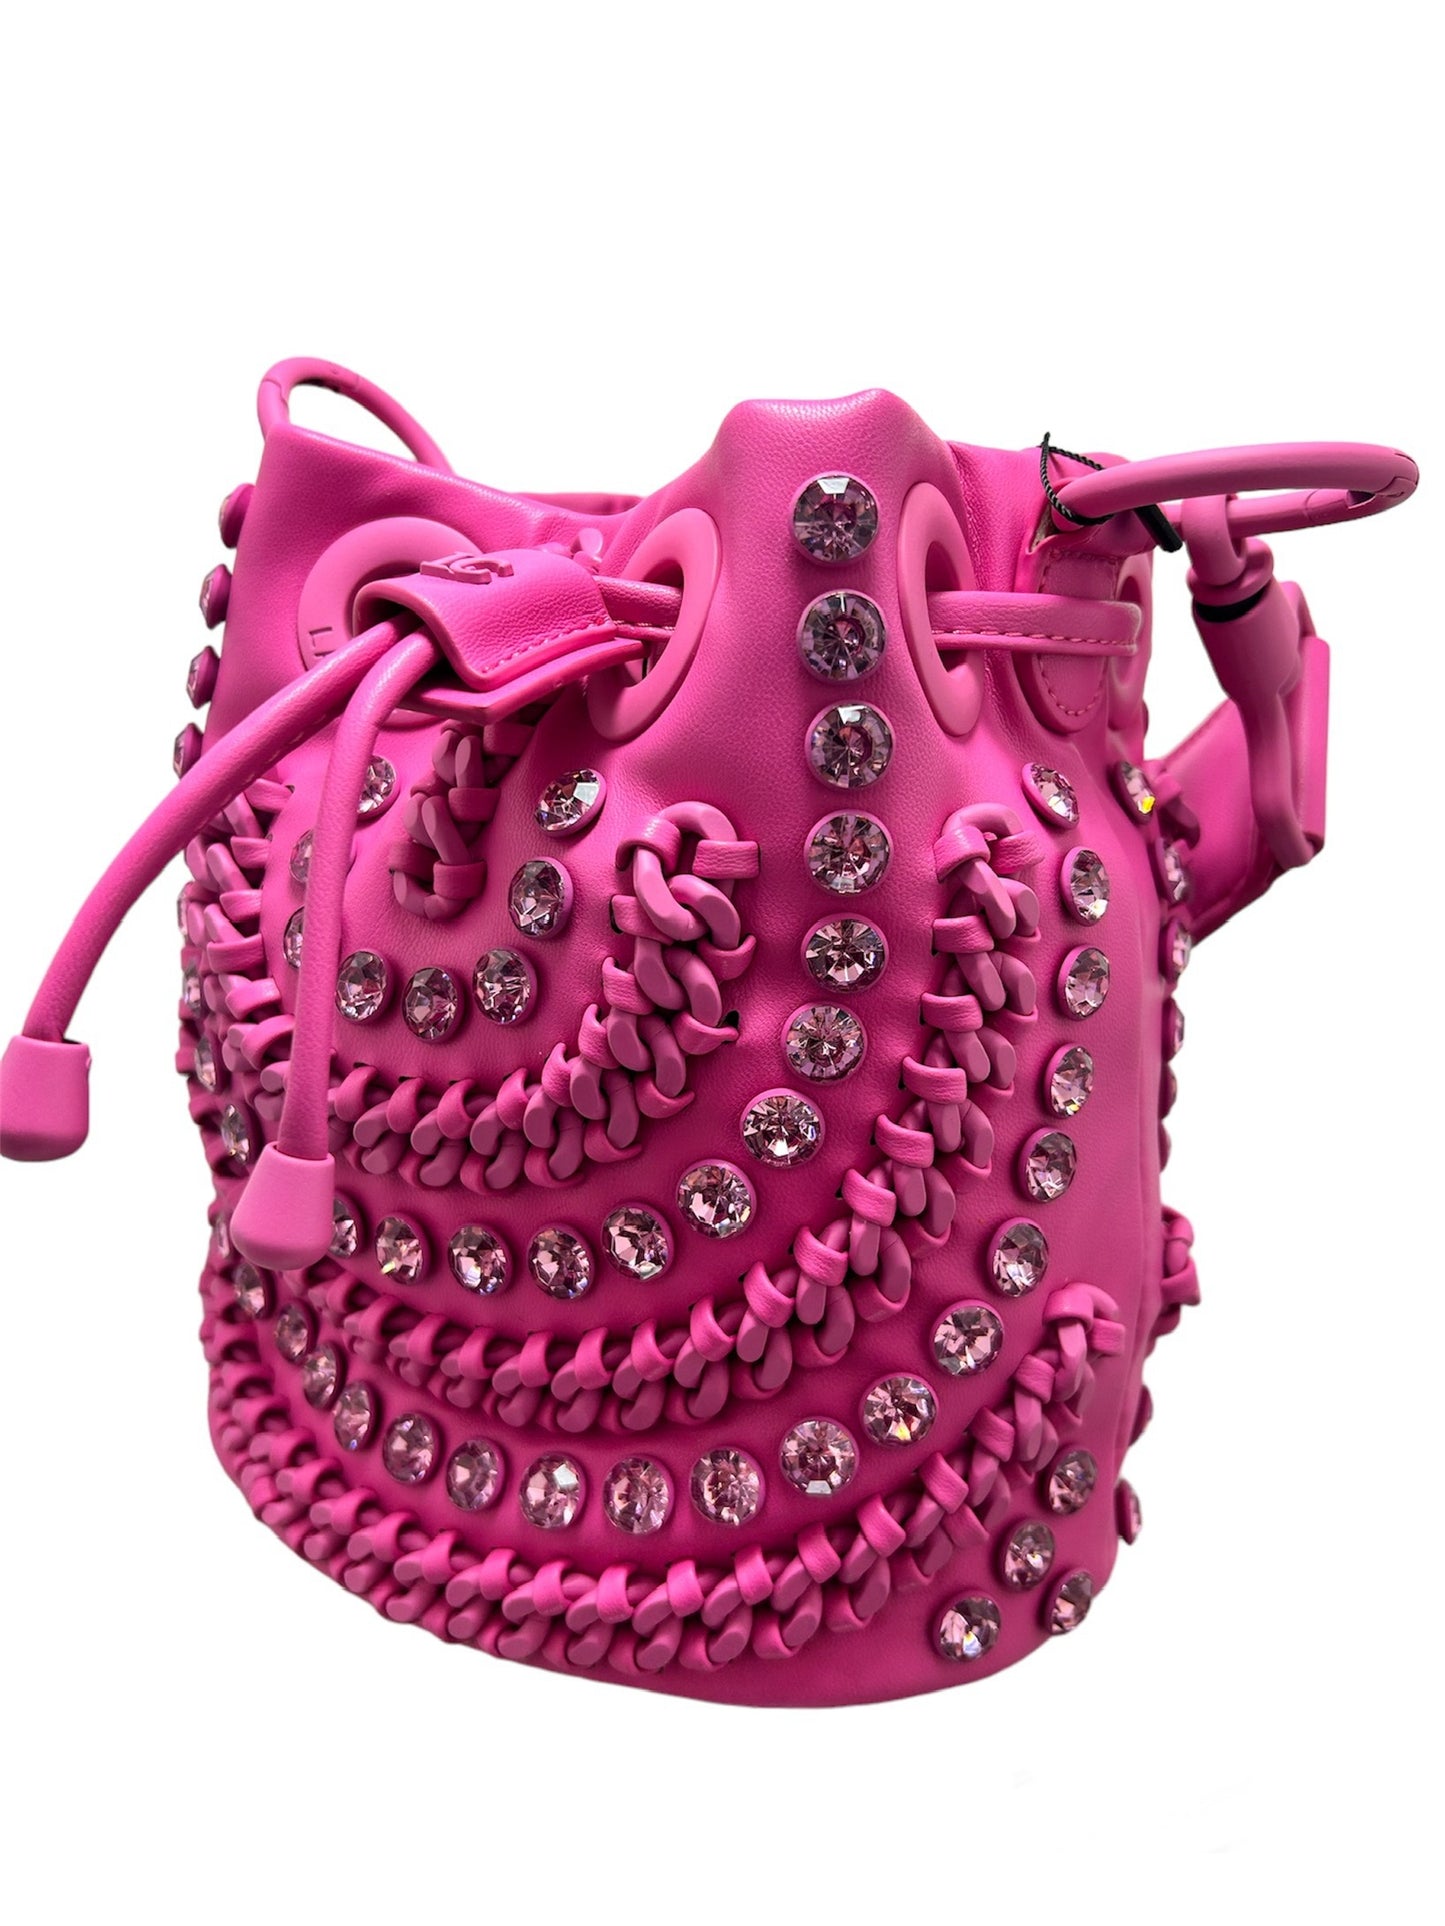 La Carrie bag- Andromeda small bucket synthetic fuxia